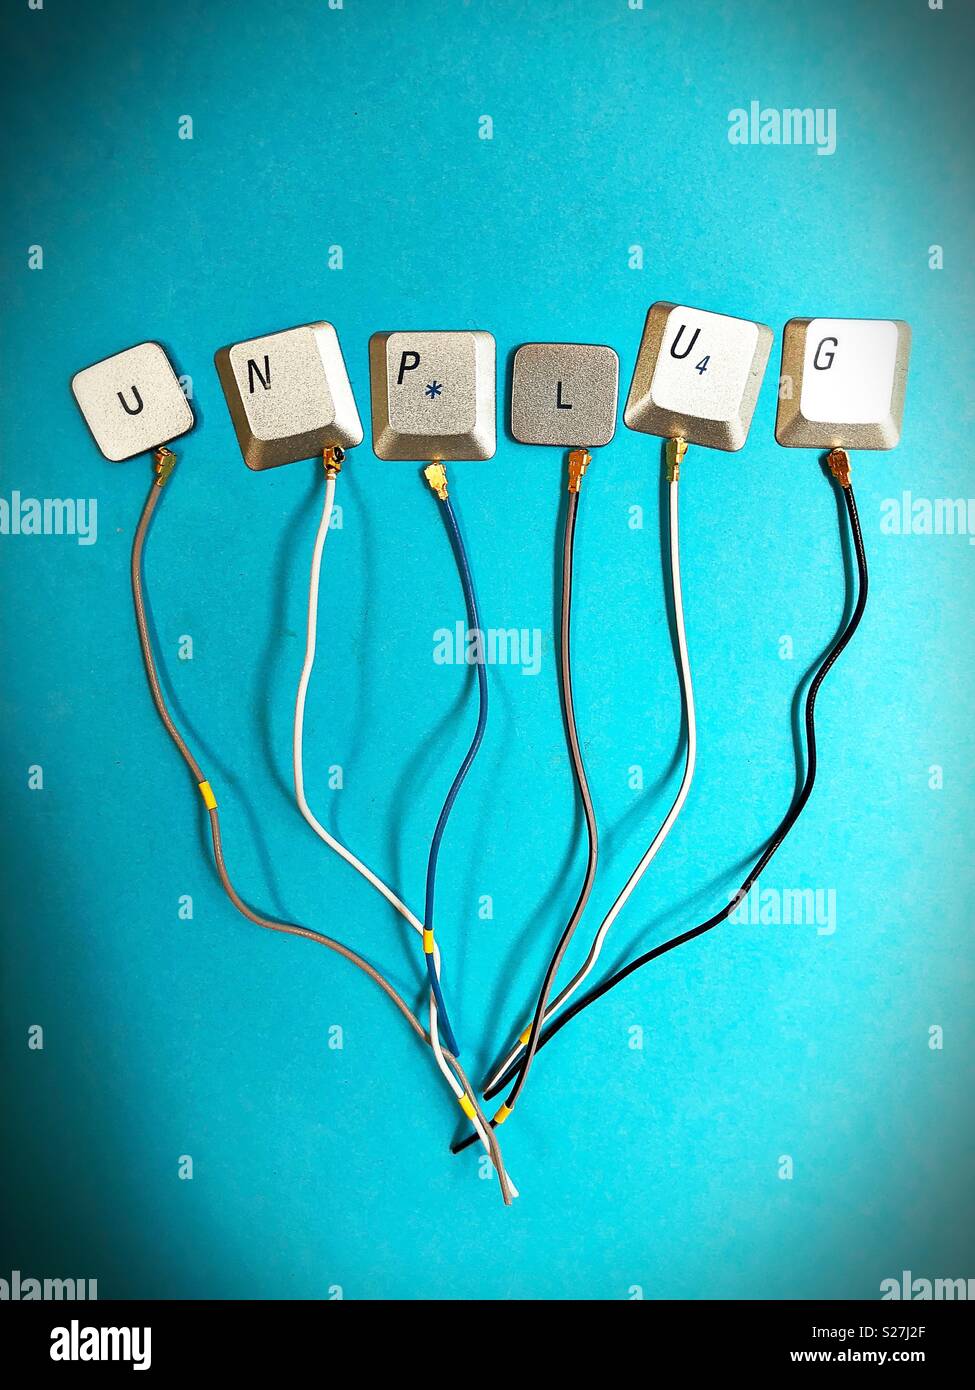 The word “unplug” made out of computer keyboard keys, and wire. Stock Photo